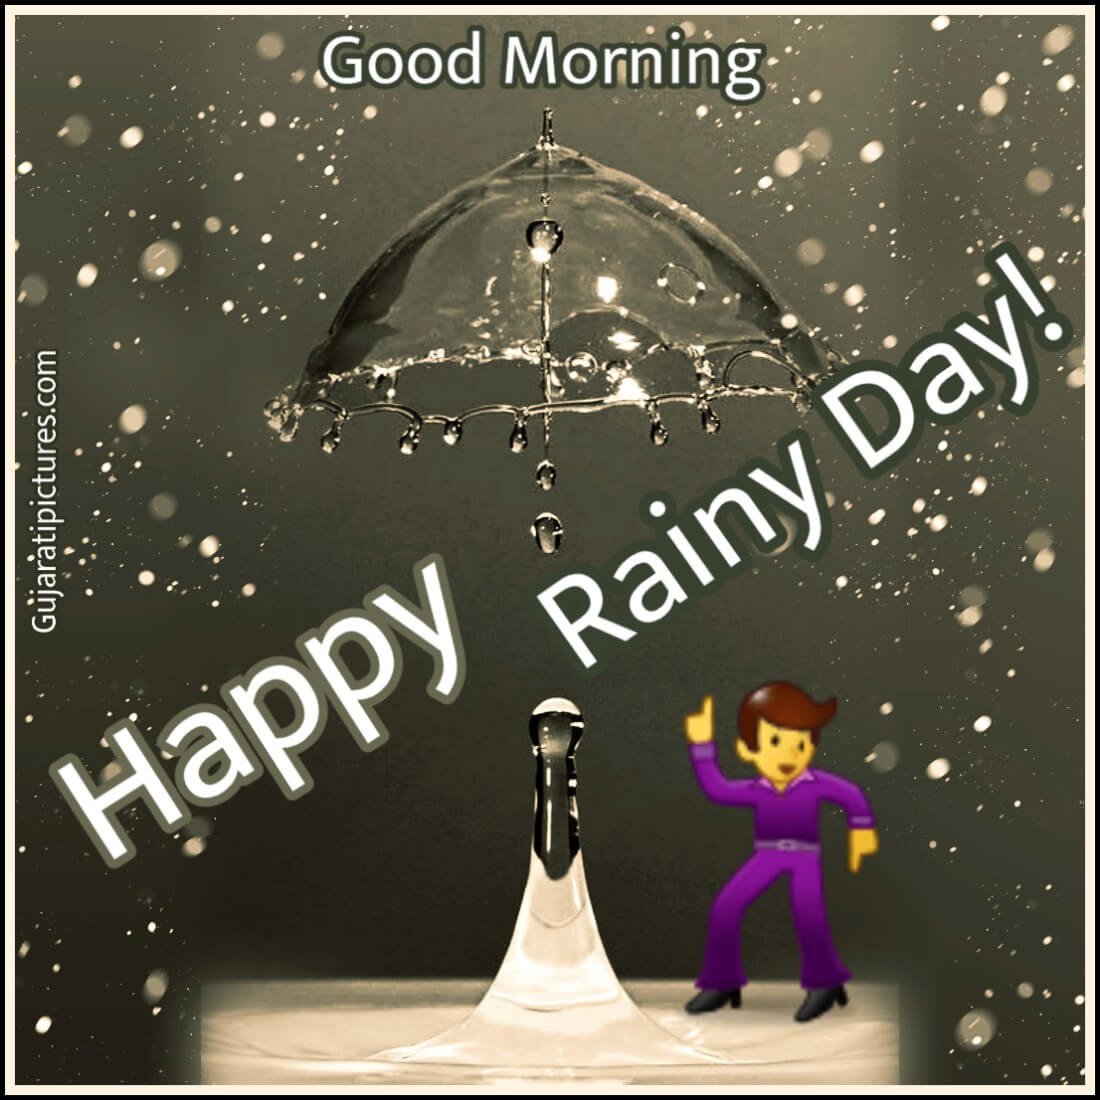 Happy Rainy Day - Gujarati Pictures – Website Dedicated to ...